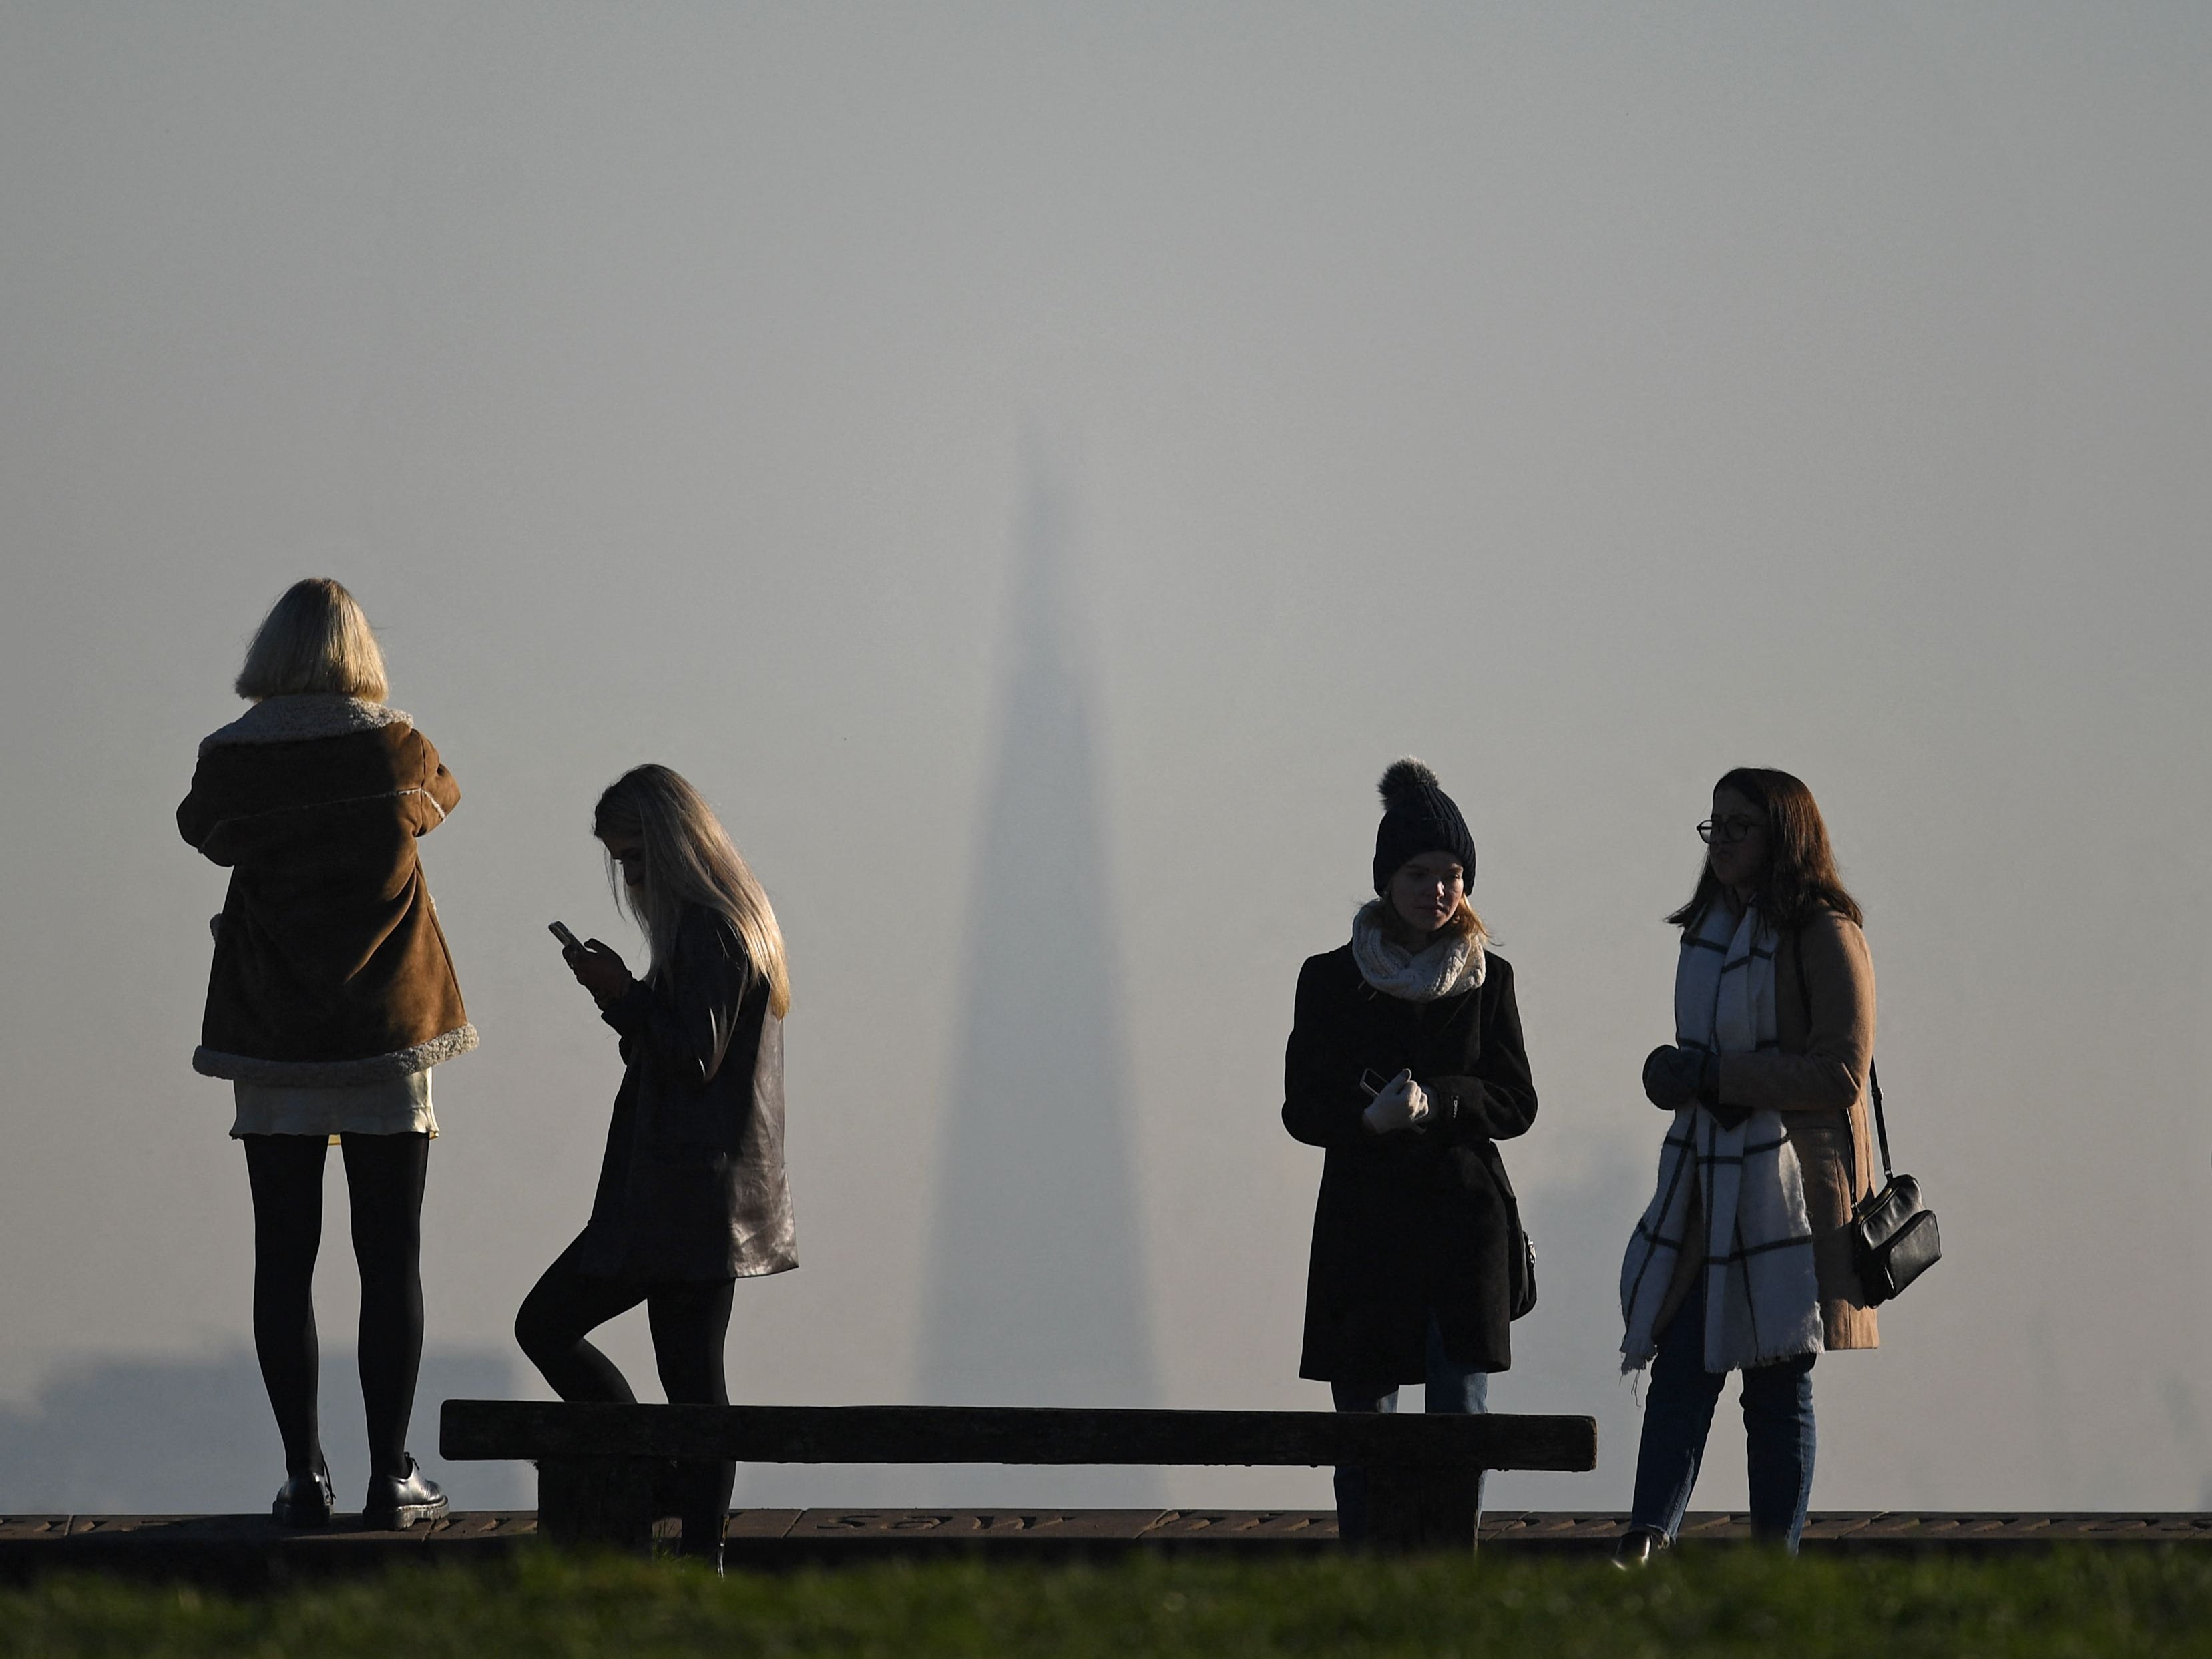 London received a warning over high pollution levels earlier this month